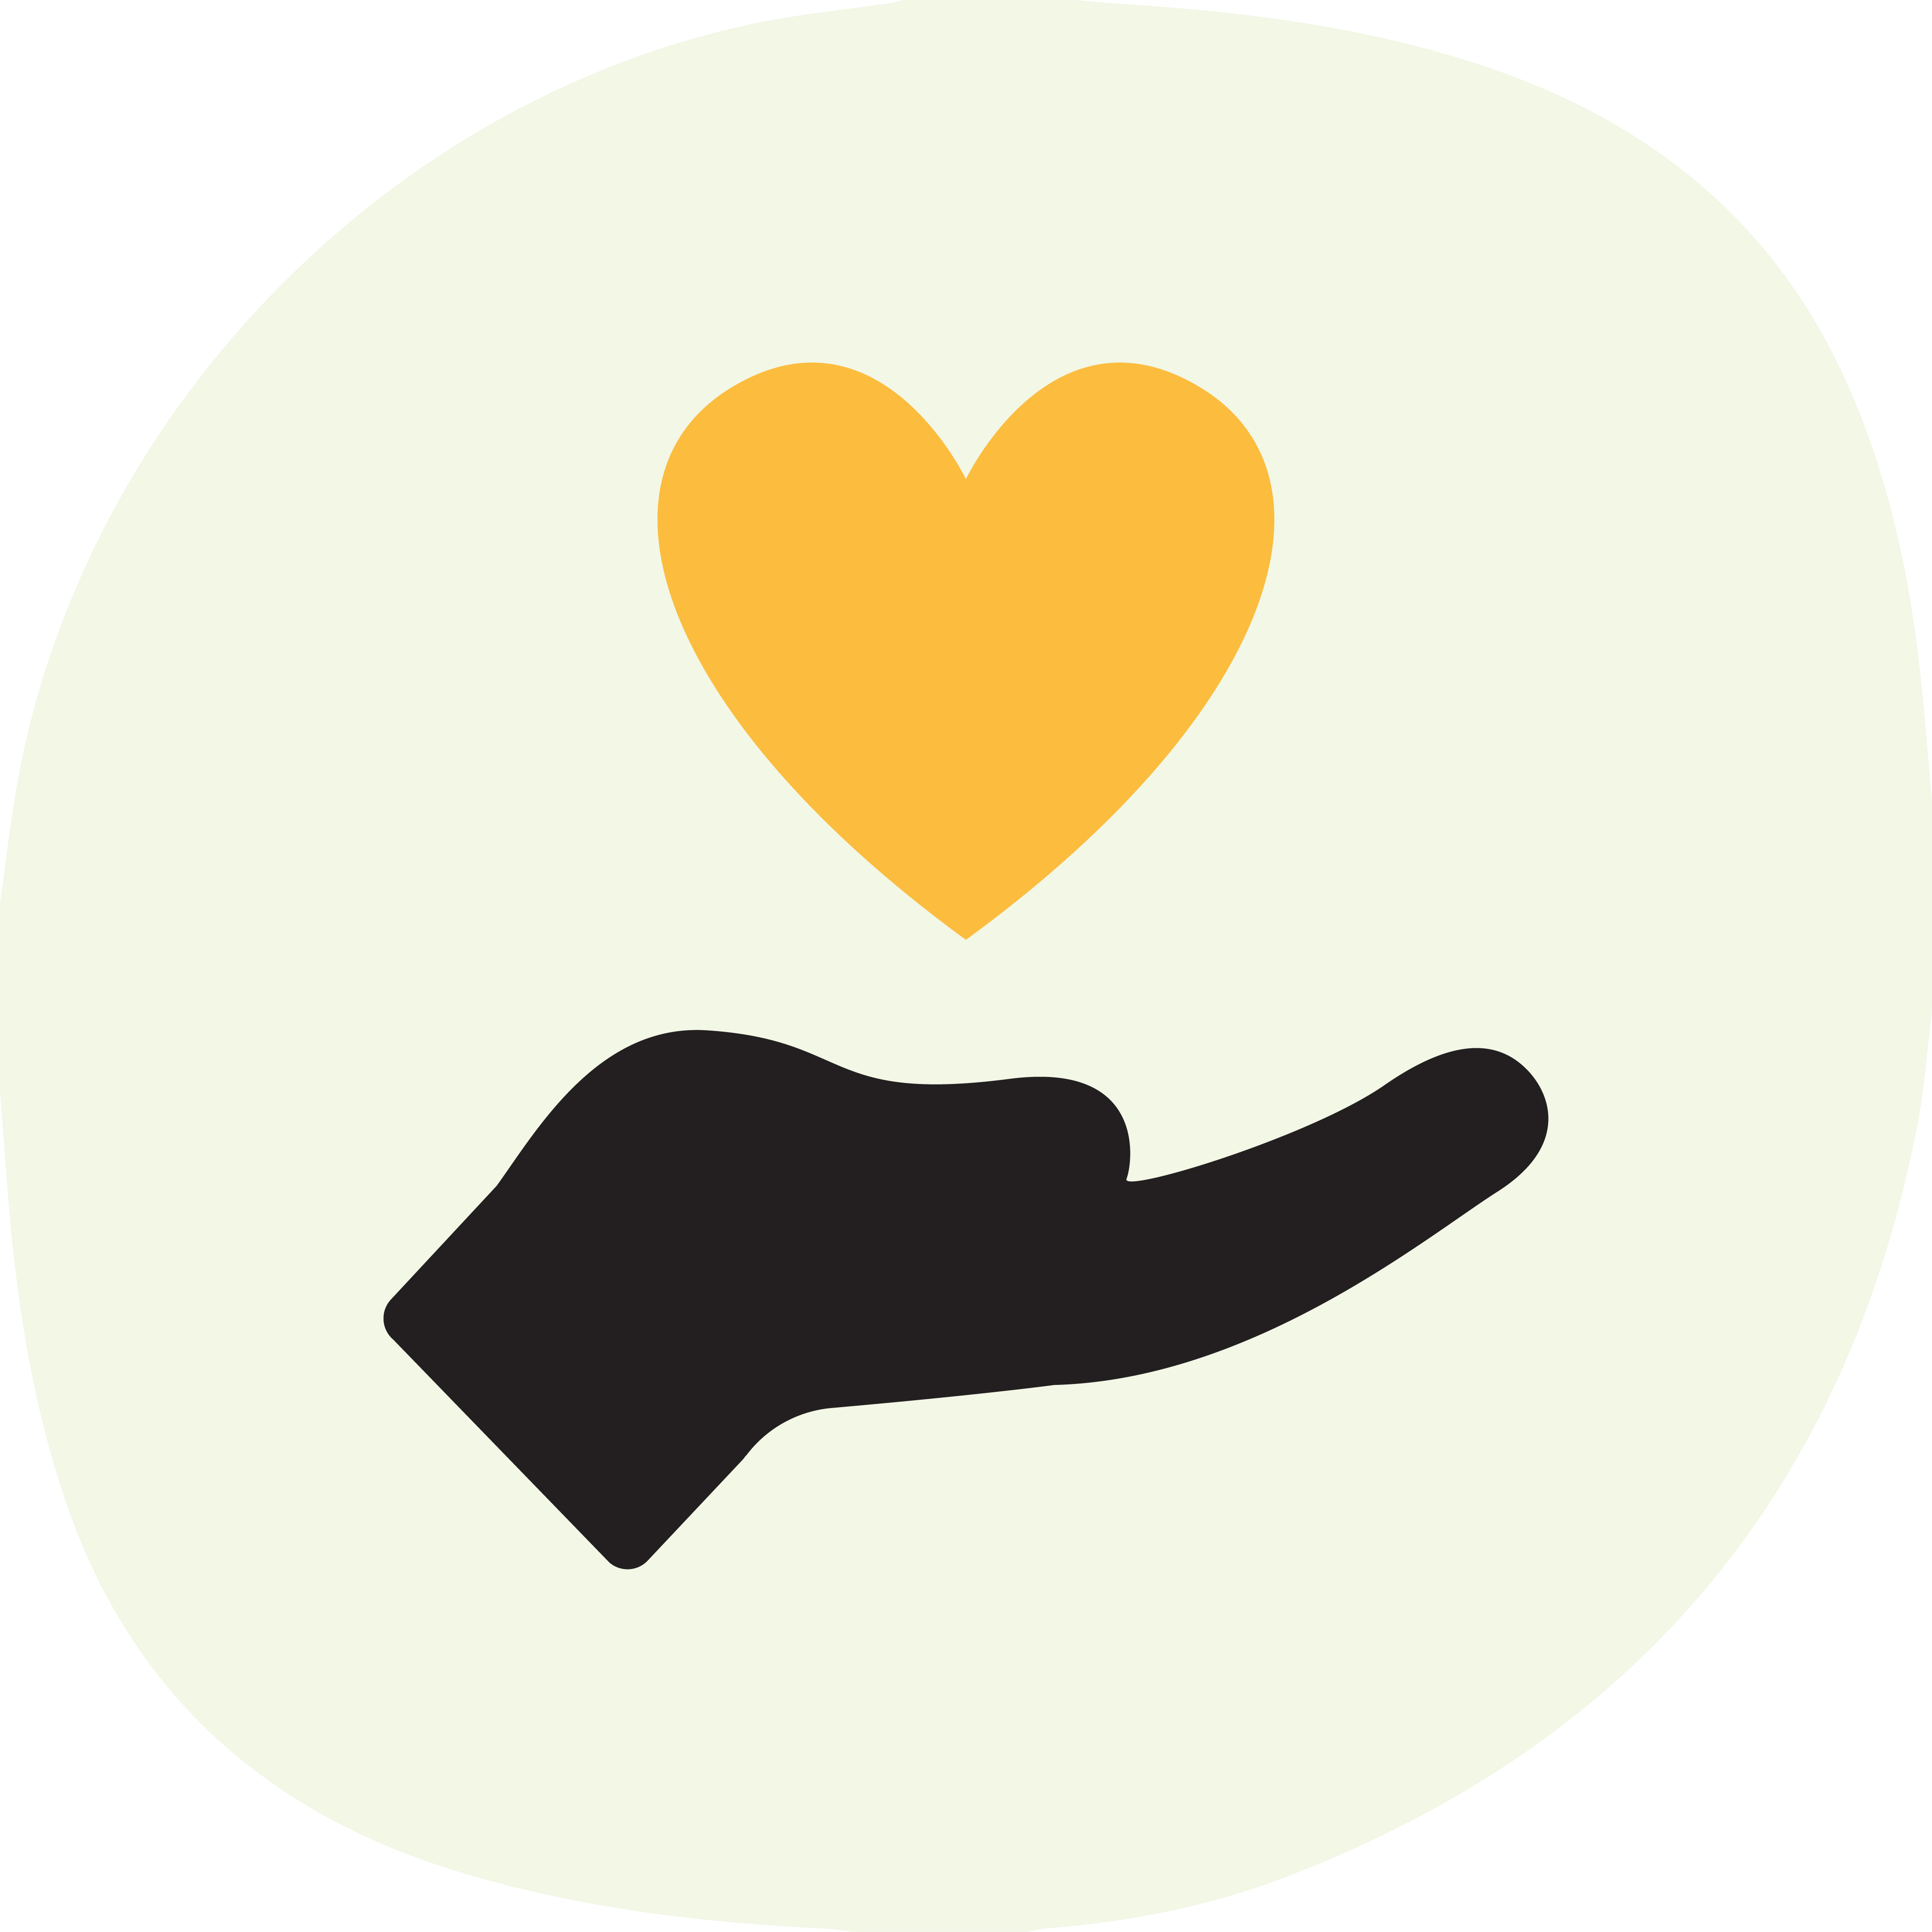 Icon with green background and hand holding a heart.